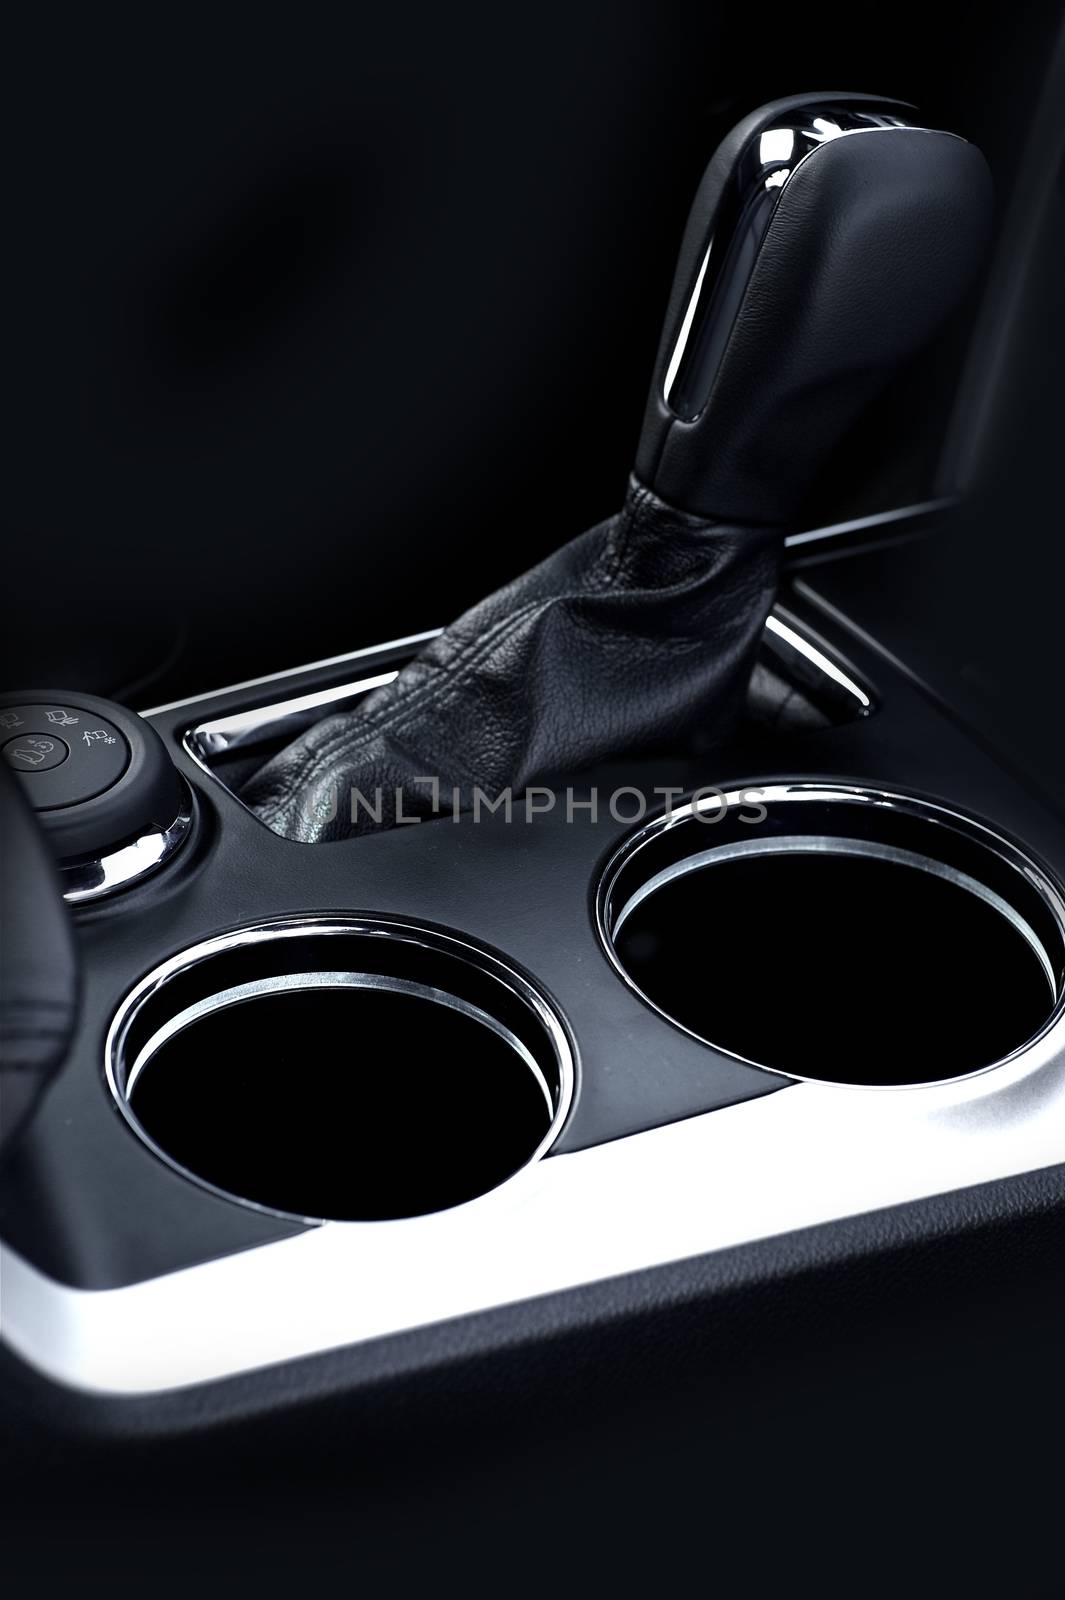 Gear Stick Automatic by welcomia